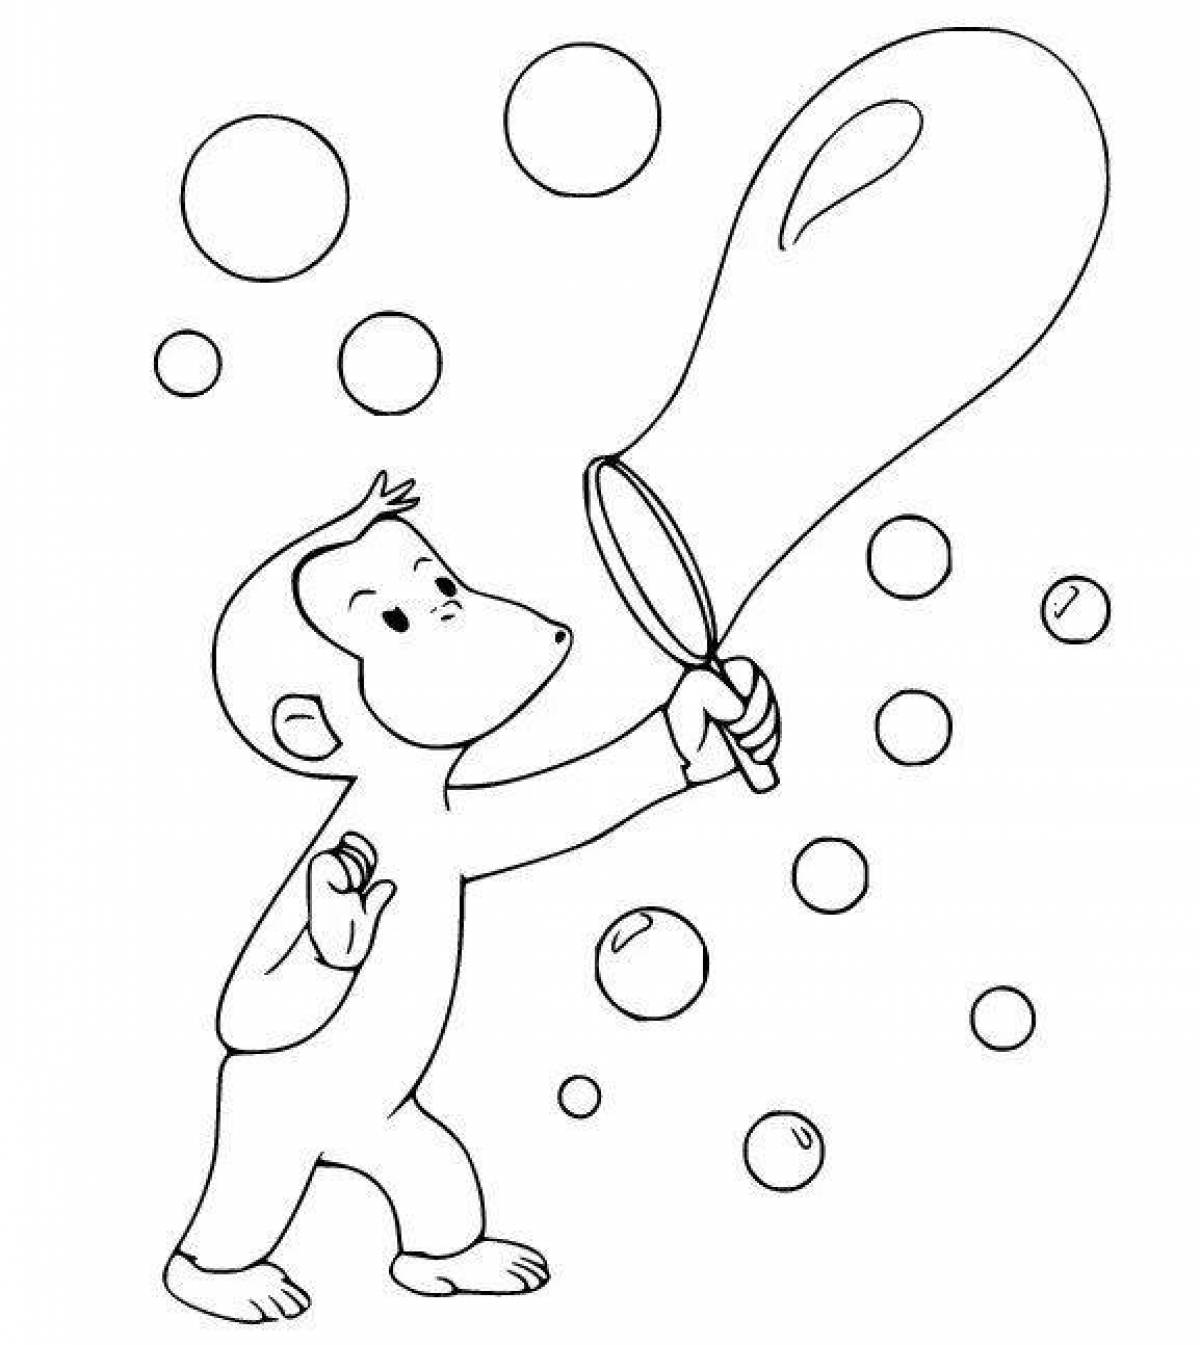 Playful coloring pages with bubbles